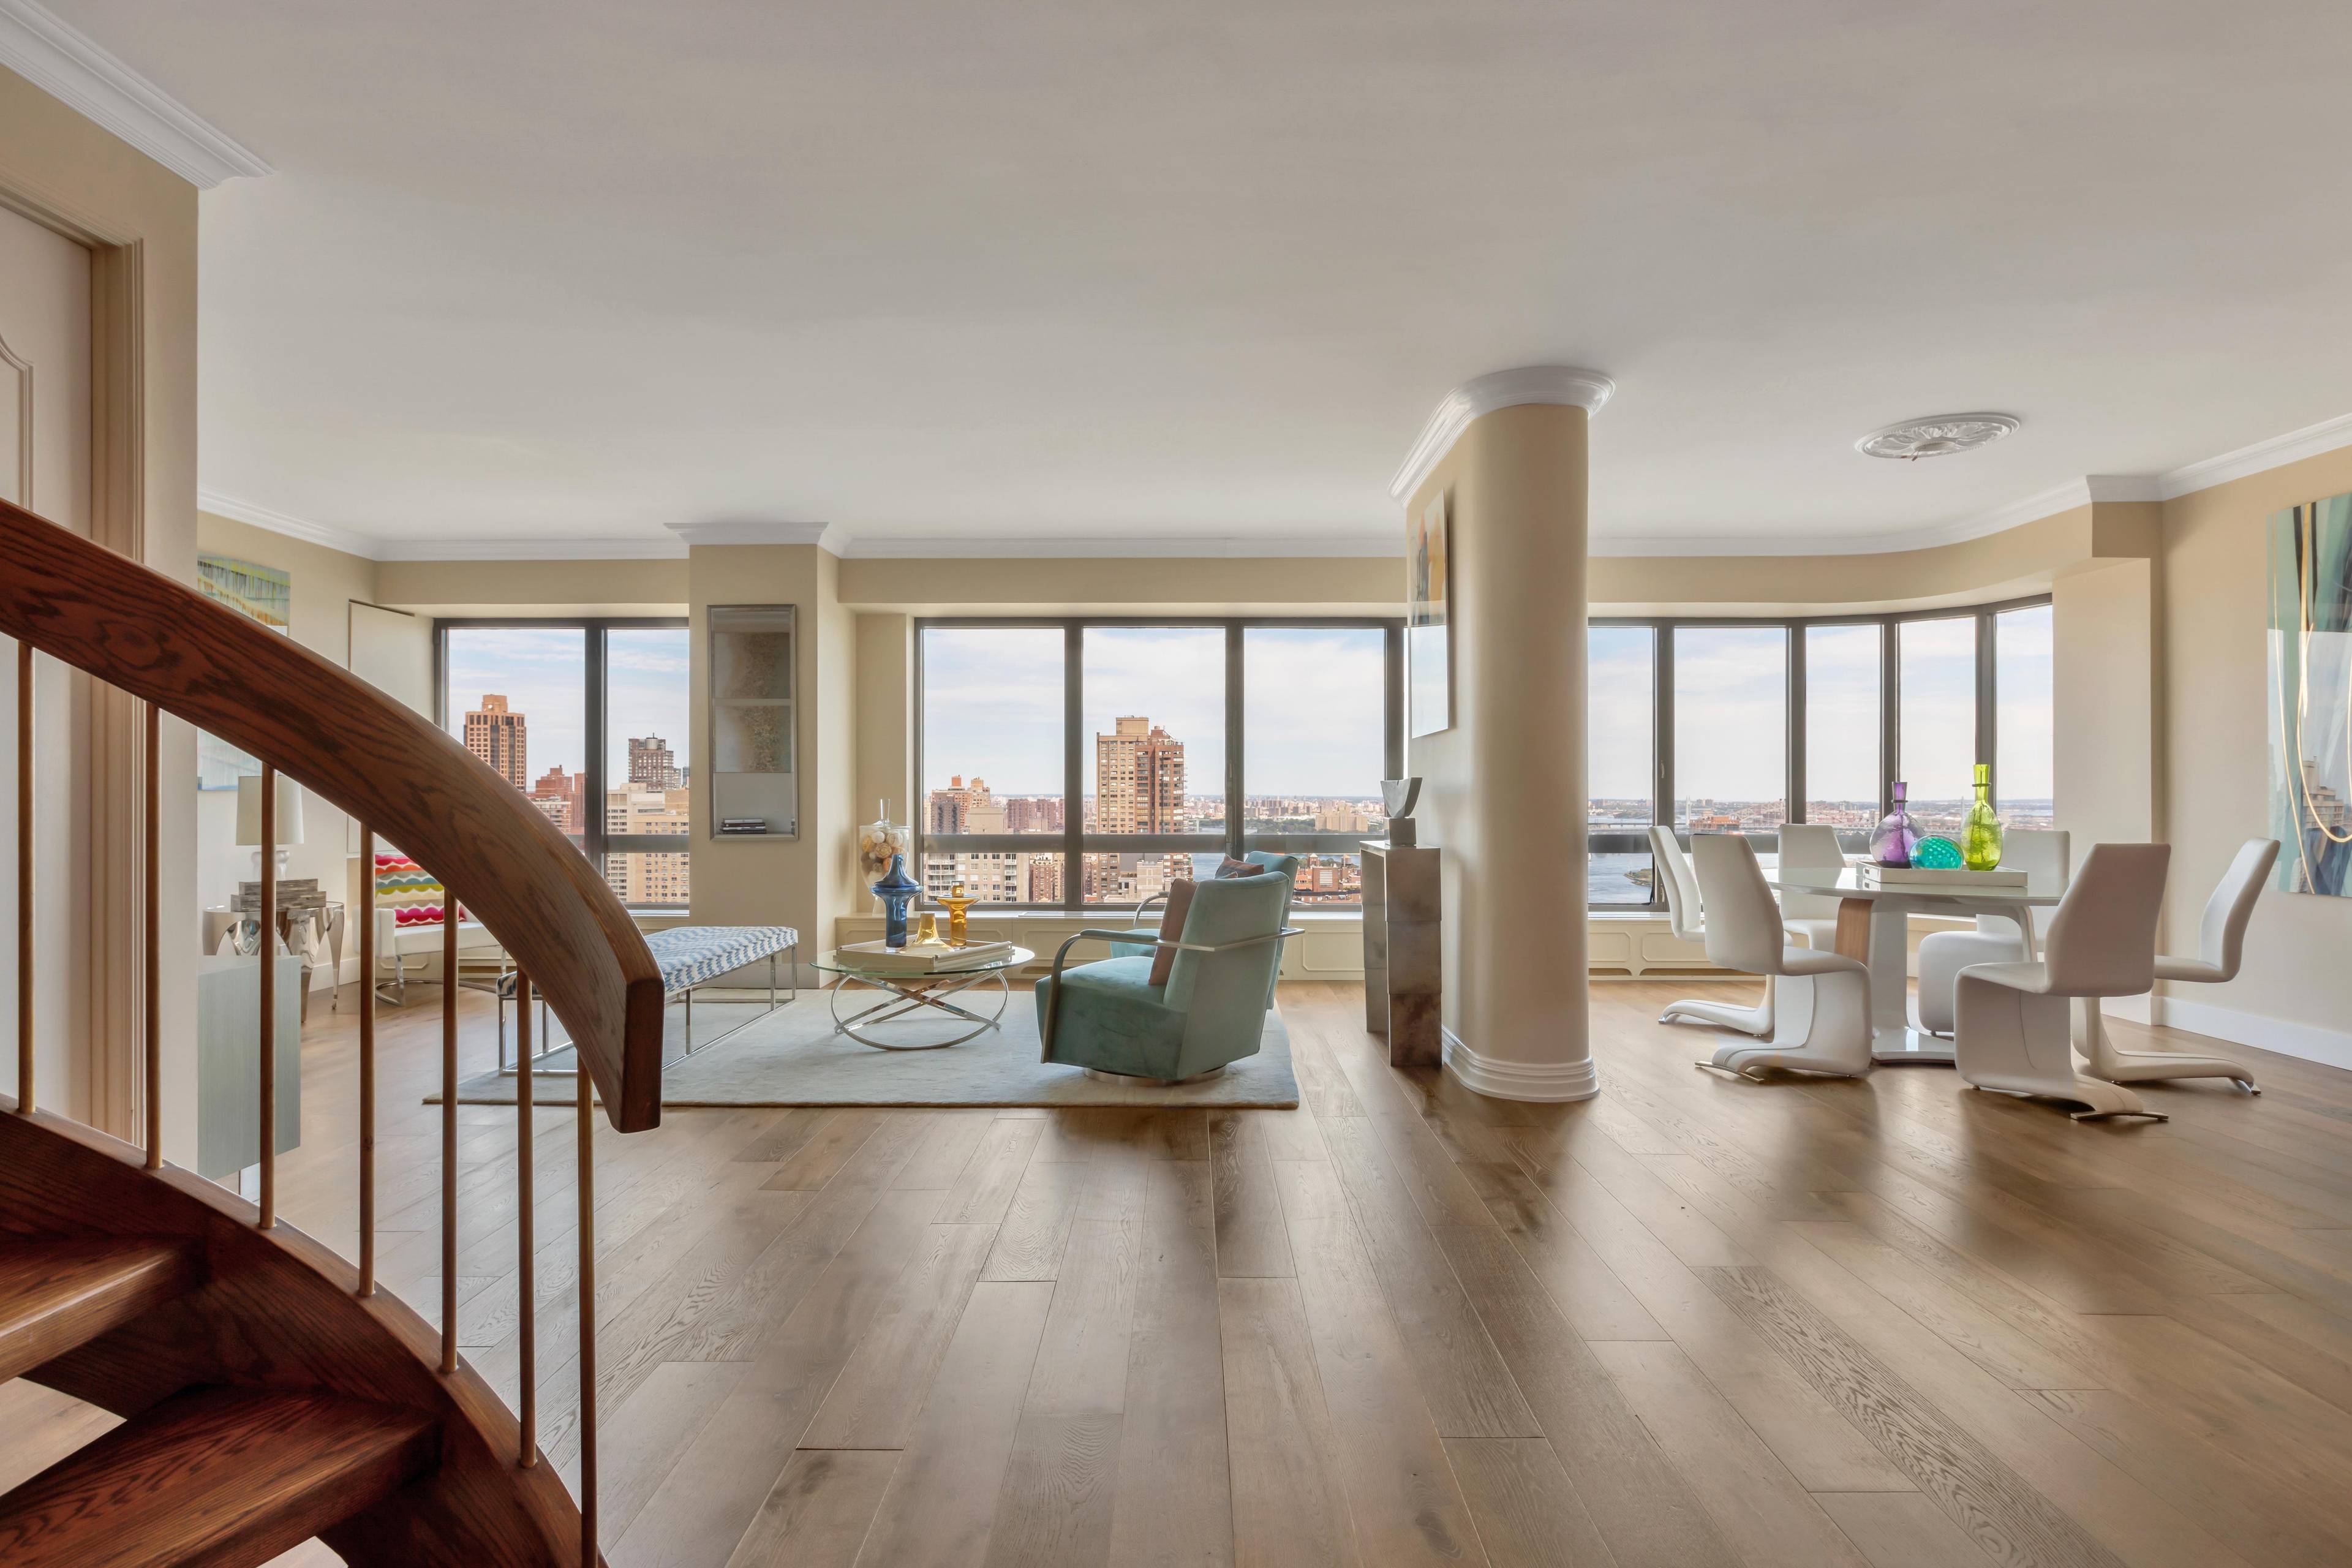 4-Bedroom Penthouse Duplex Condo with Panoramic River Views through Wall of Windows